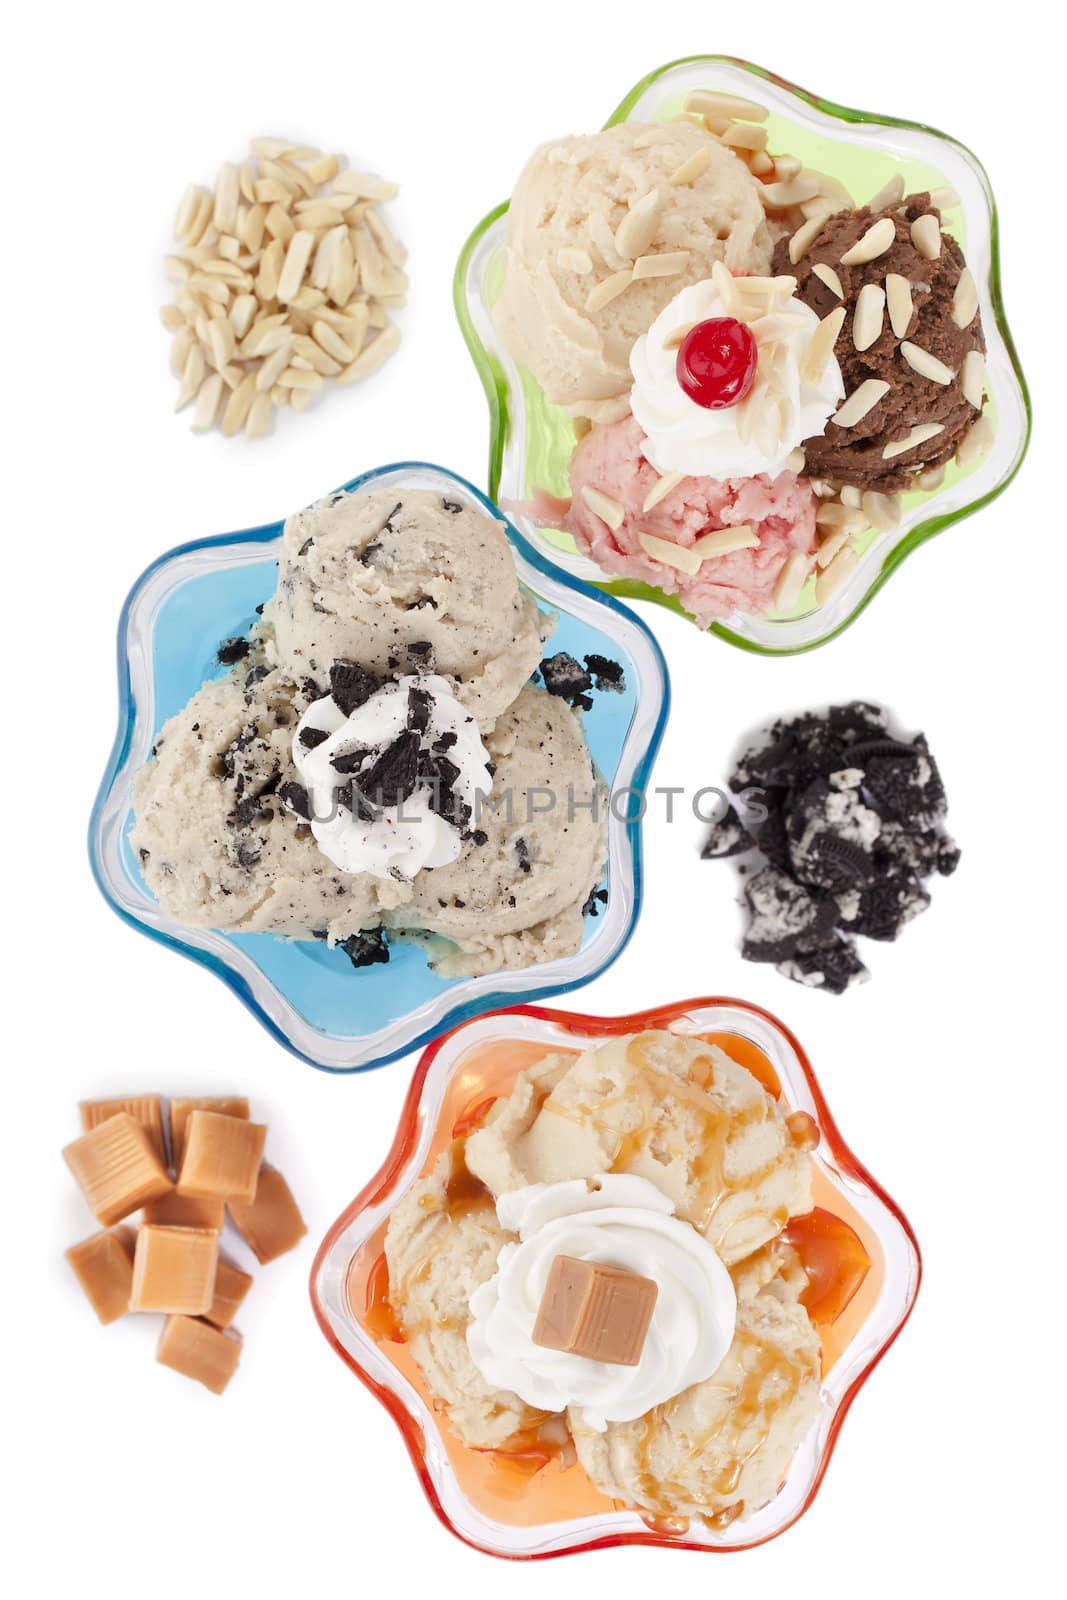 Image top view image of three assorted flavors of ice cream against white background